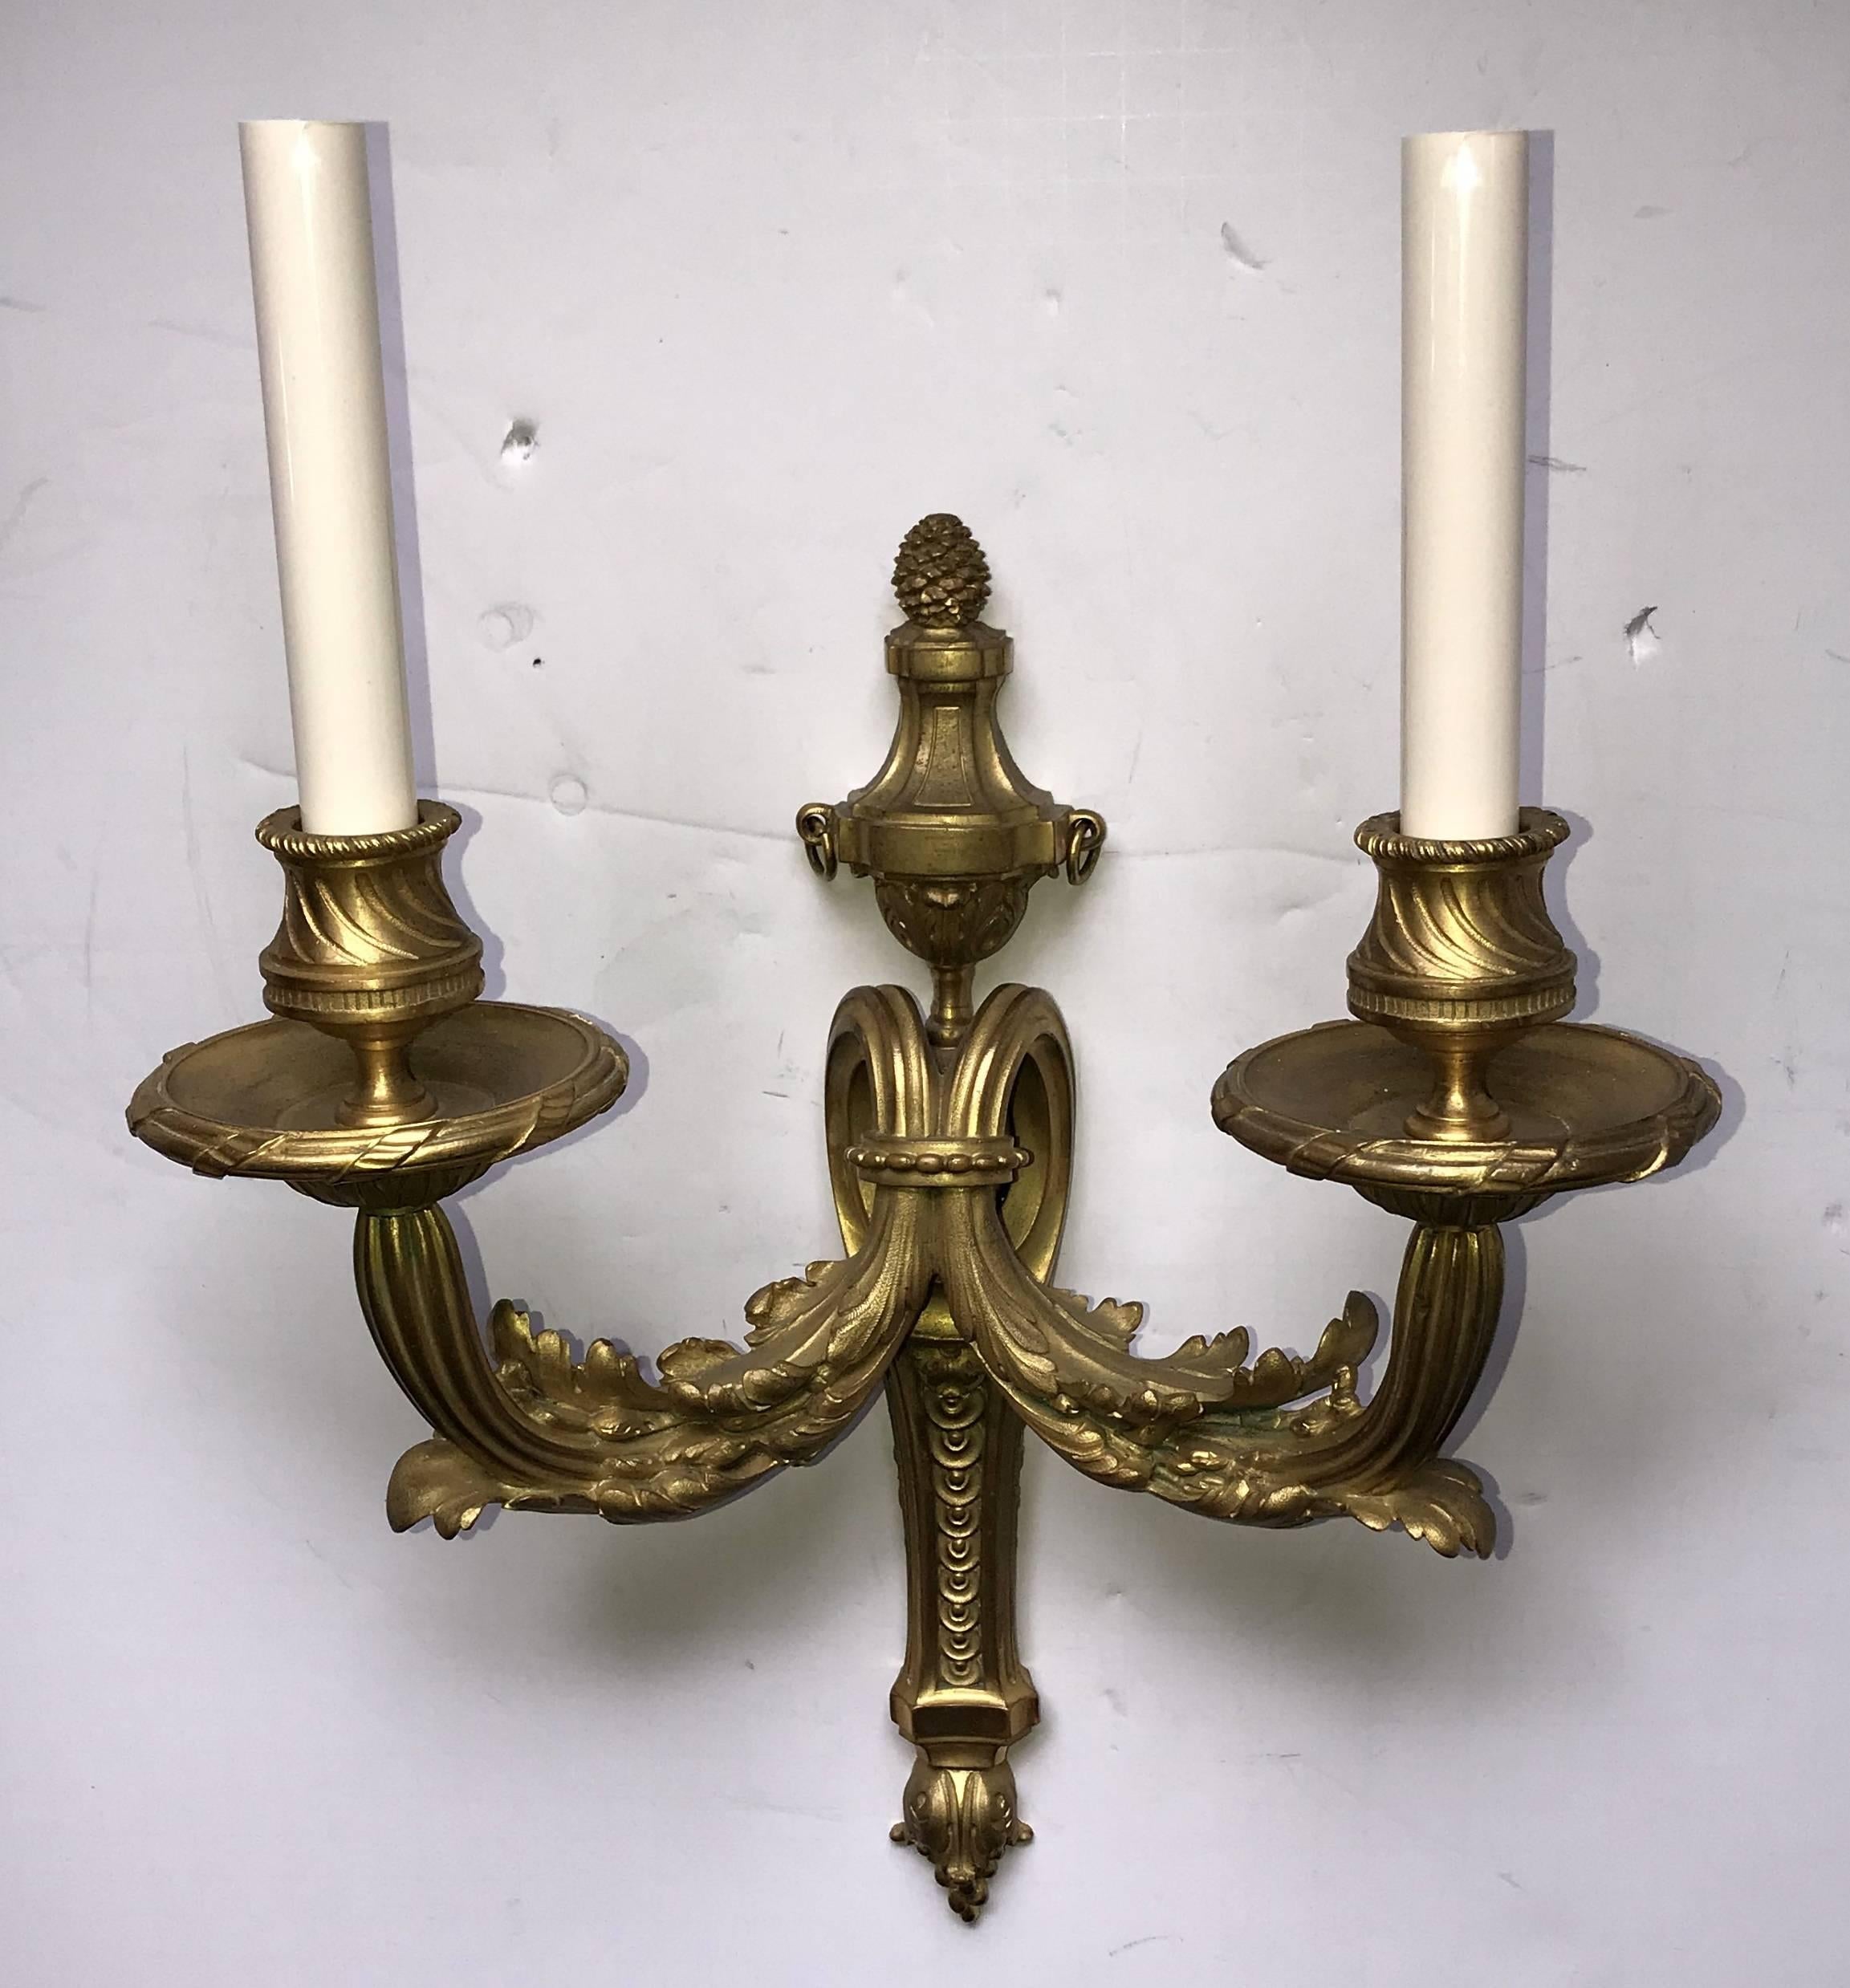 Wonderful Pair French Bronze Neoclassical Caldwell Regency Urn Filigree Sconces For Sale 1